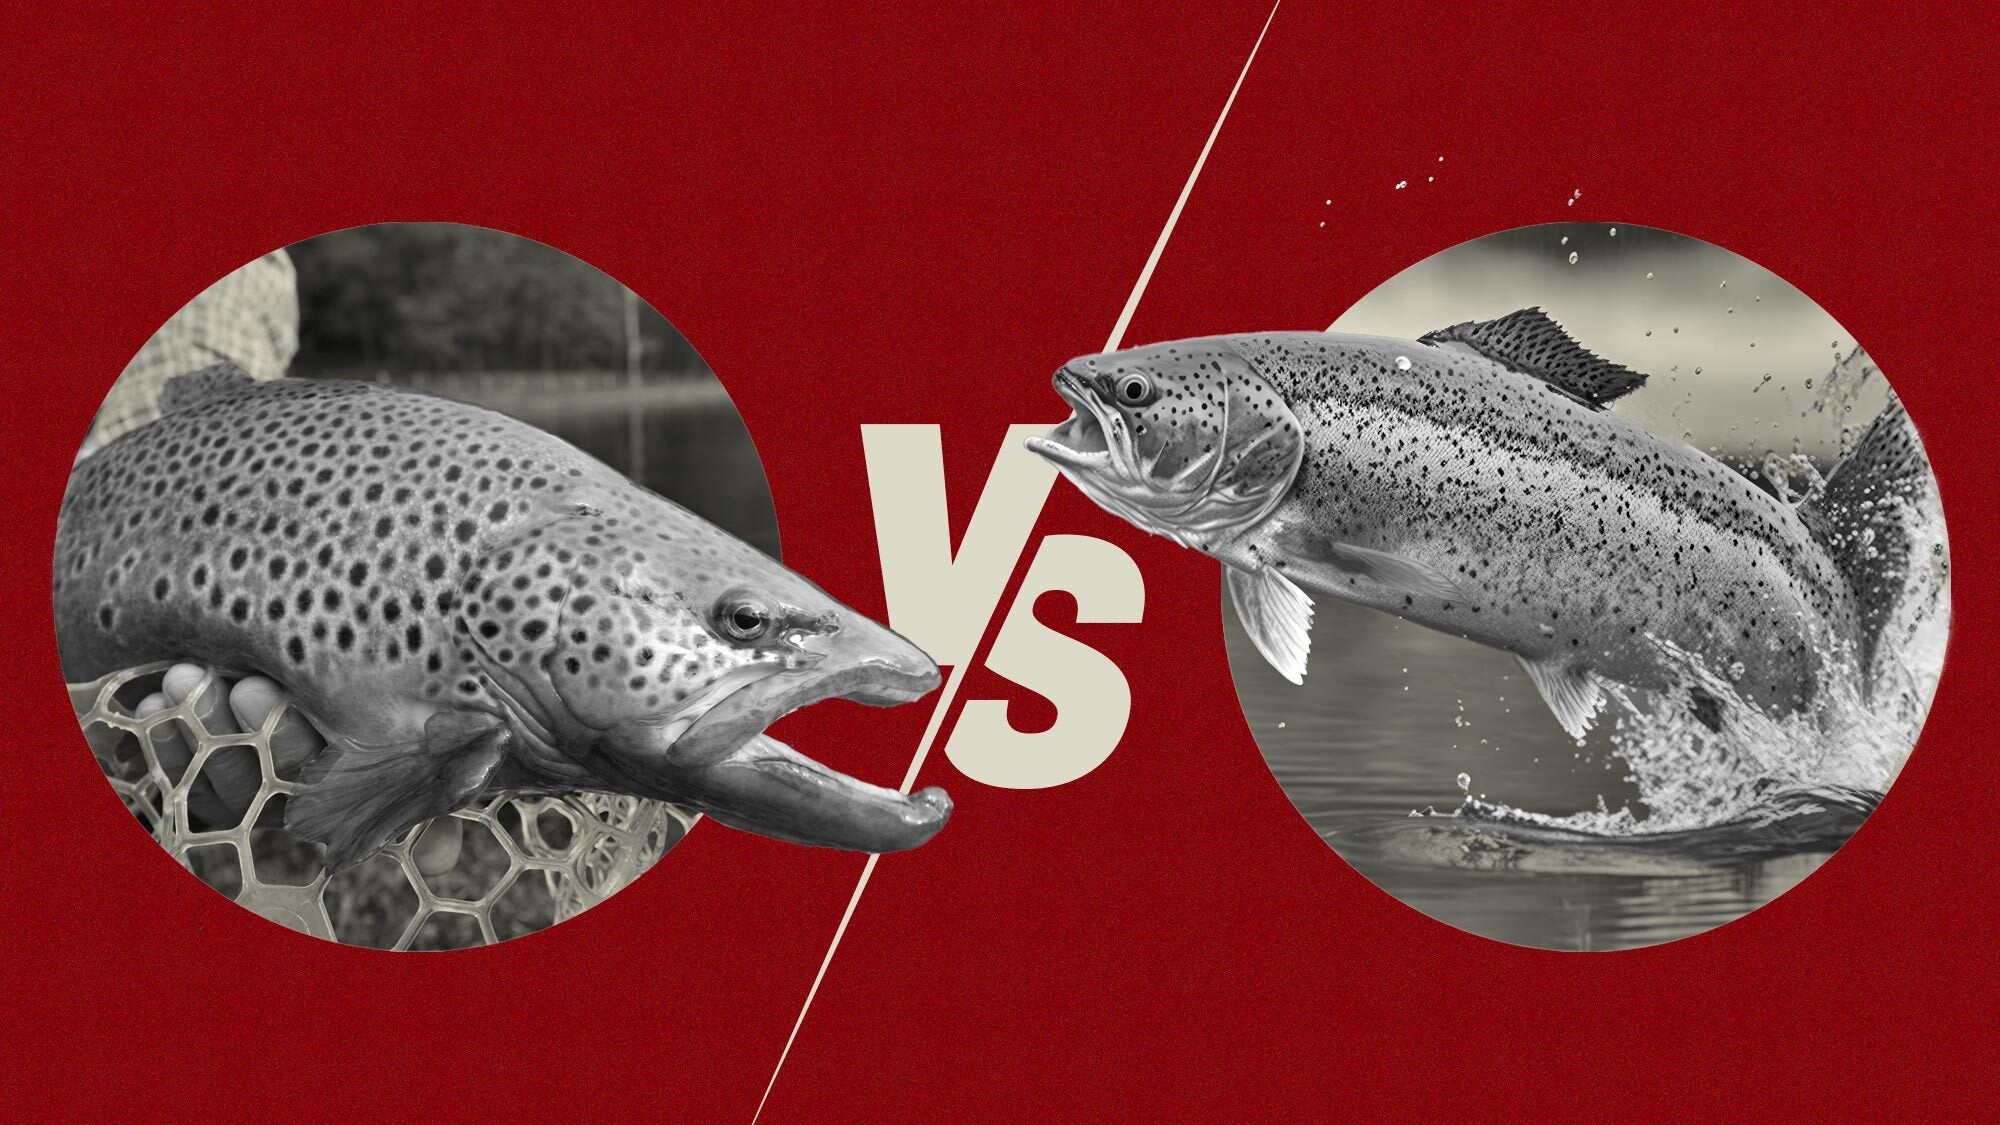 East Vs. West: Who's Better at Fly Fishing?